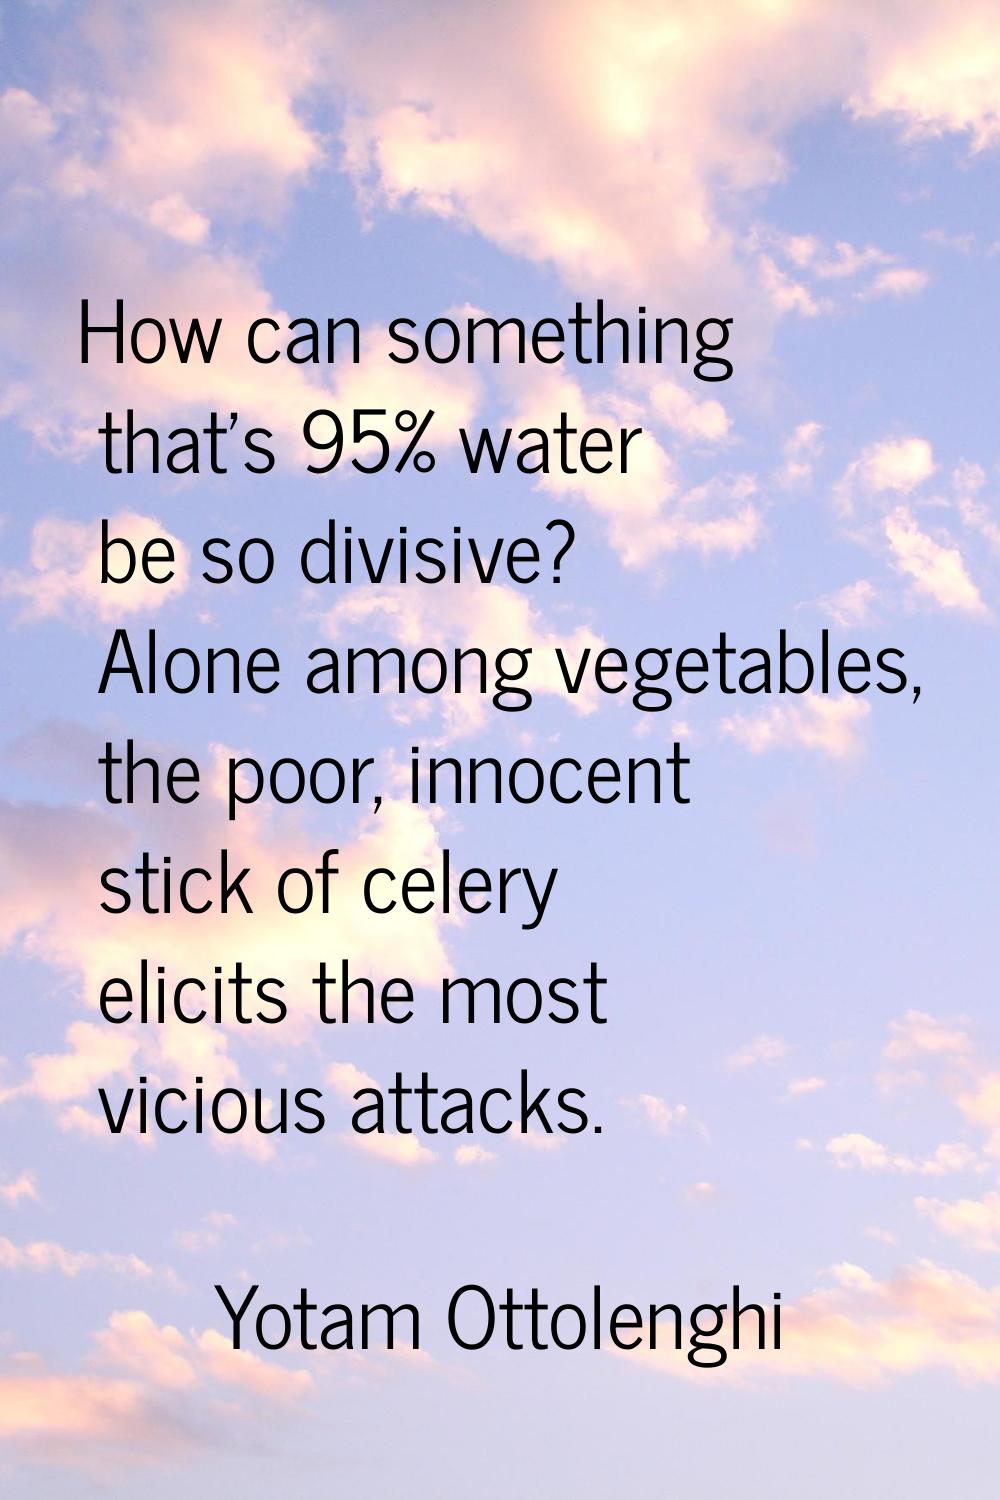 How can something that's 95% water be so divisive? Alone among vegetables, the poor, innocent stick